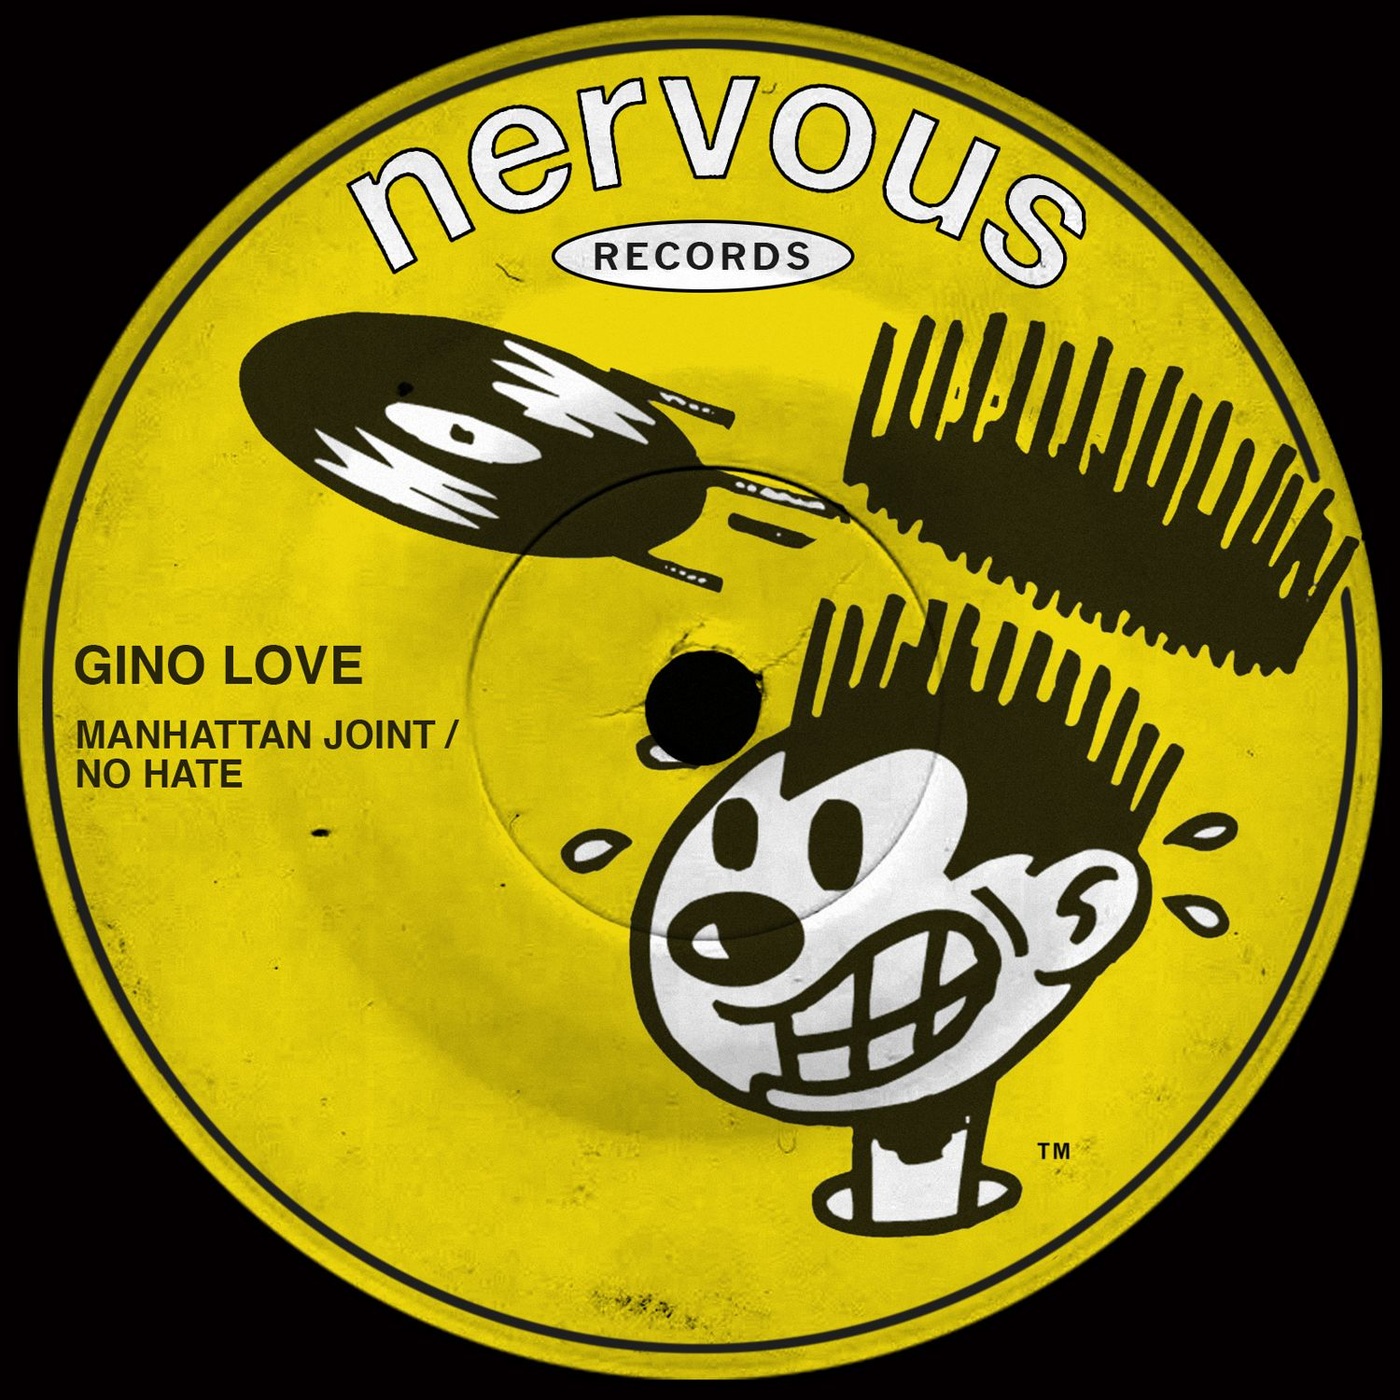 Gino Love - Manhattan Joint / No Hate / Nervous Records